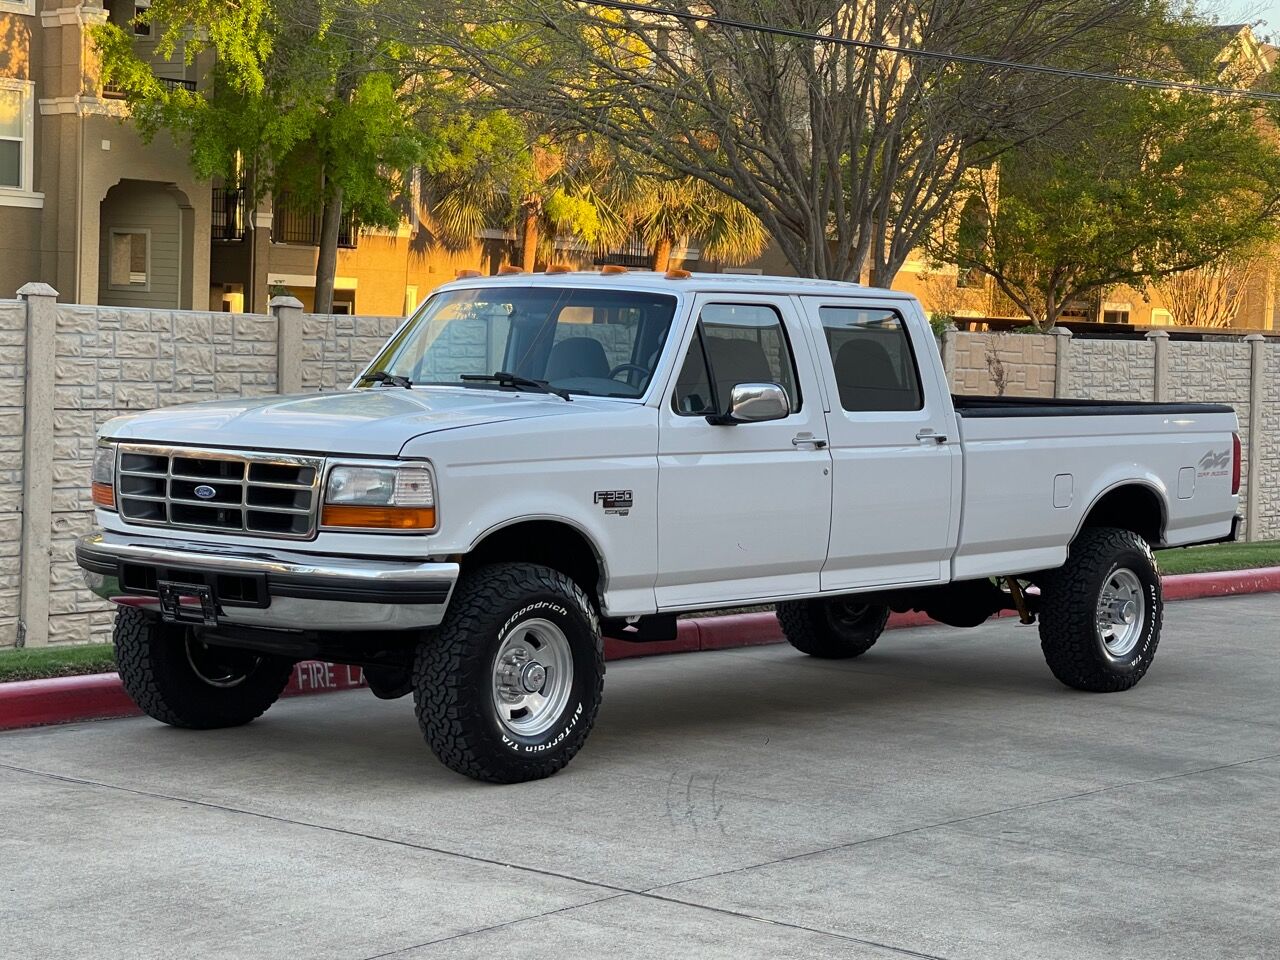 1997 Ford F-350 For Sale - Carsforsale.com®